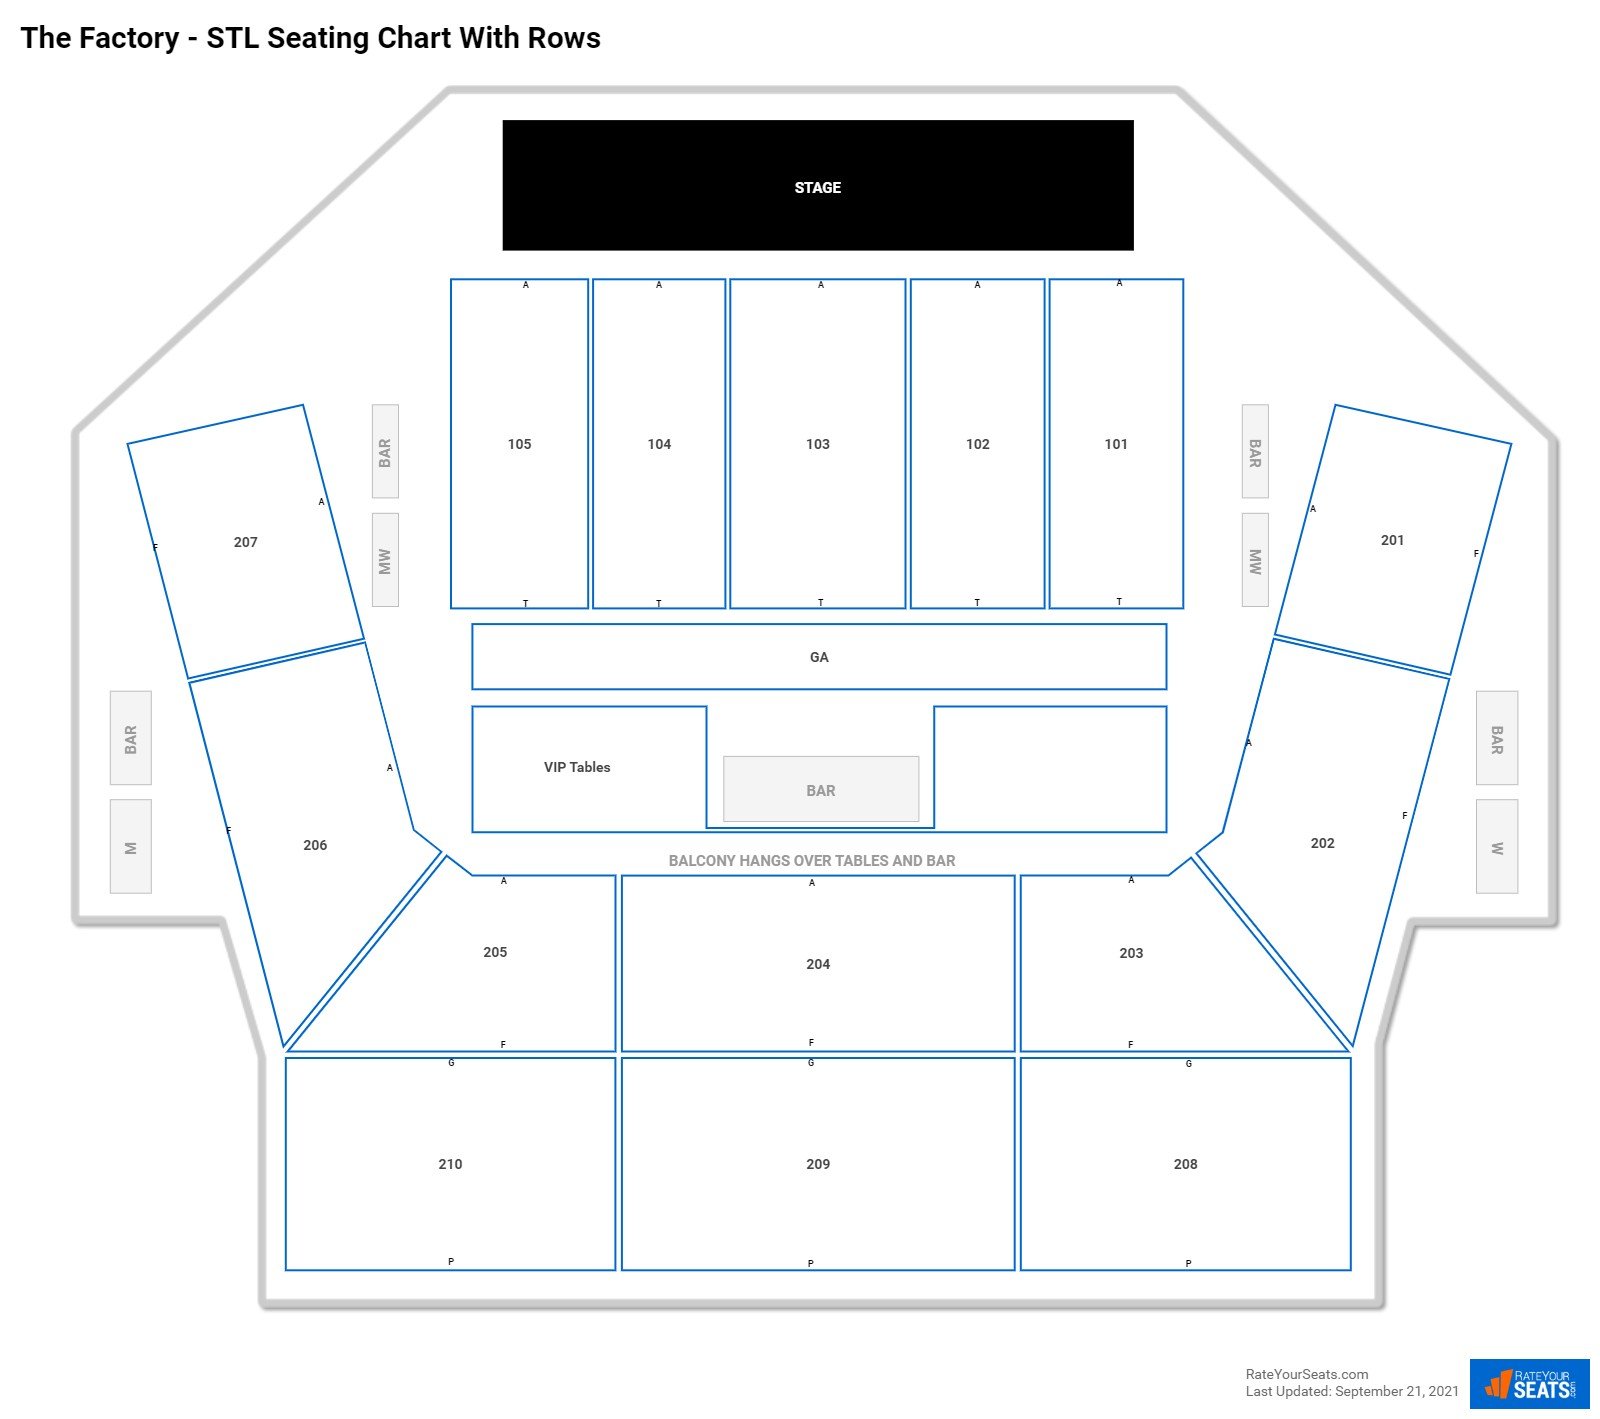 The Factory - STL seating chart with row numbers